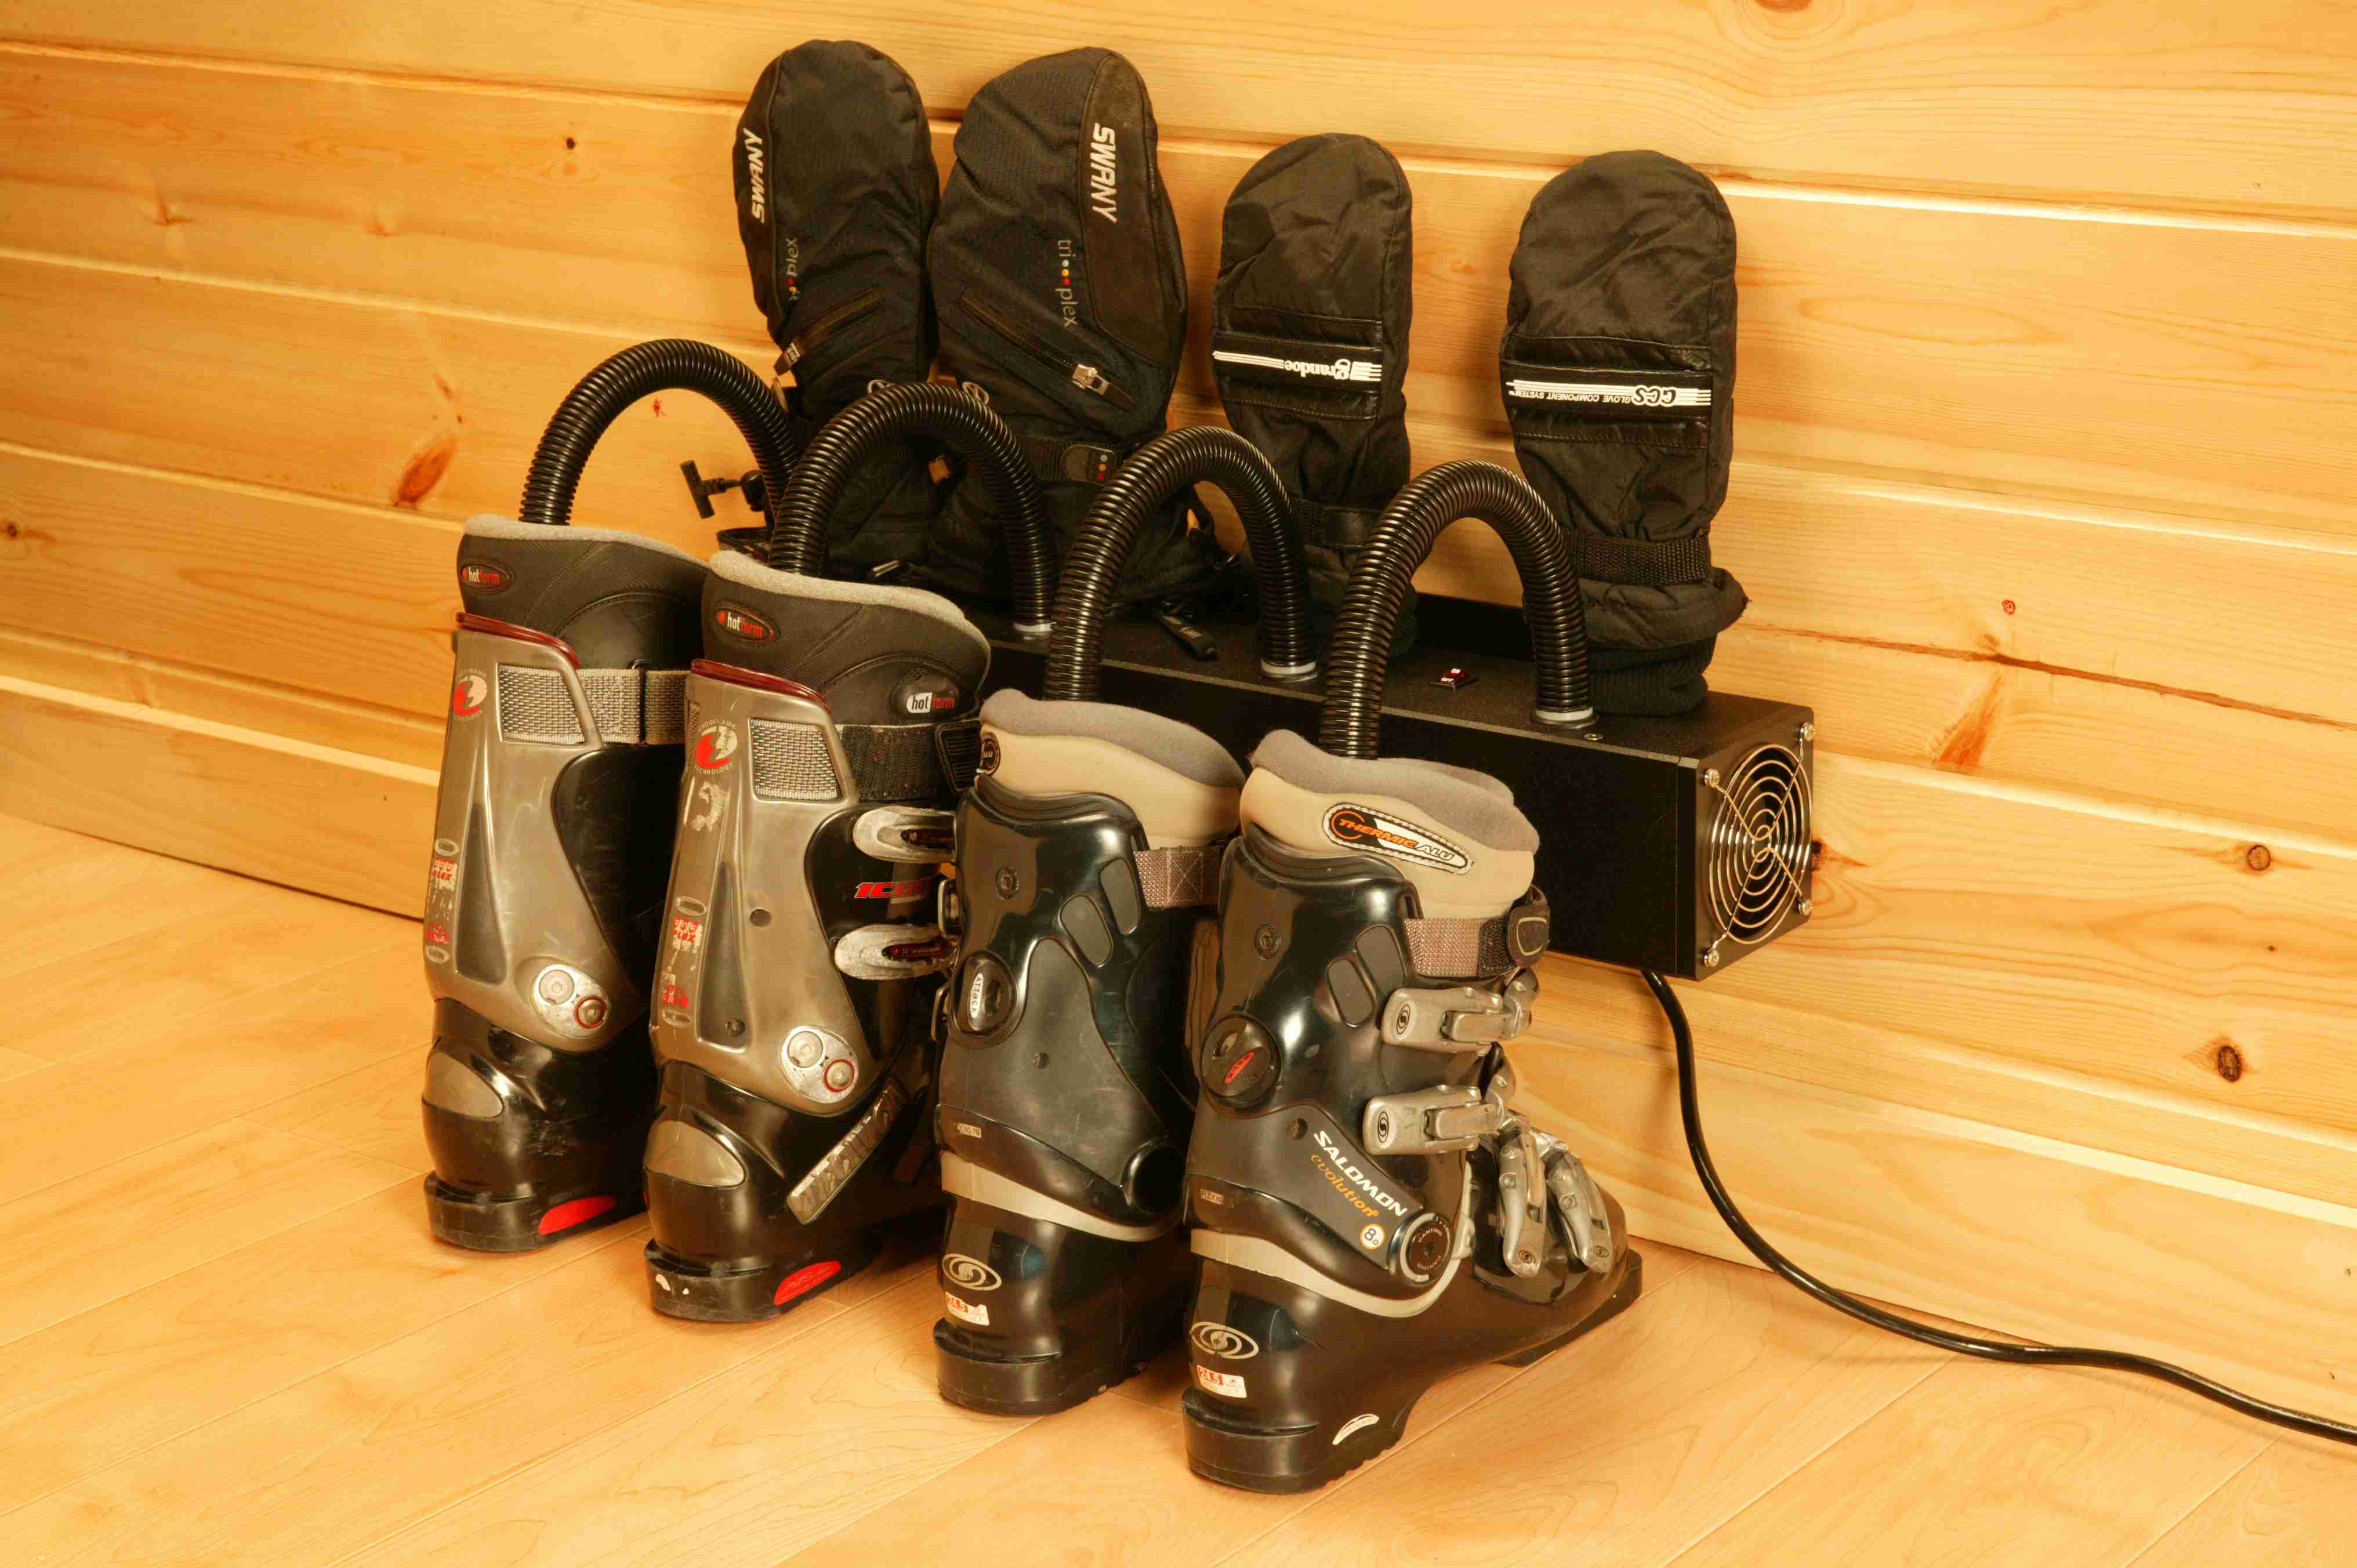 Shoe Dryer, Shoe Warmers, Ski Boot Dryer Shoes Drying Adjustable Time For  Boots